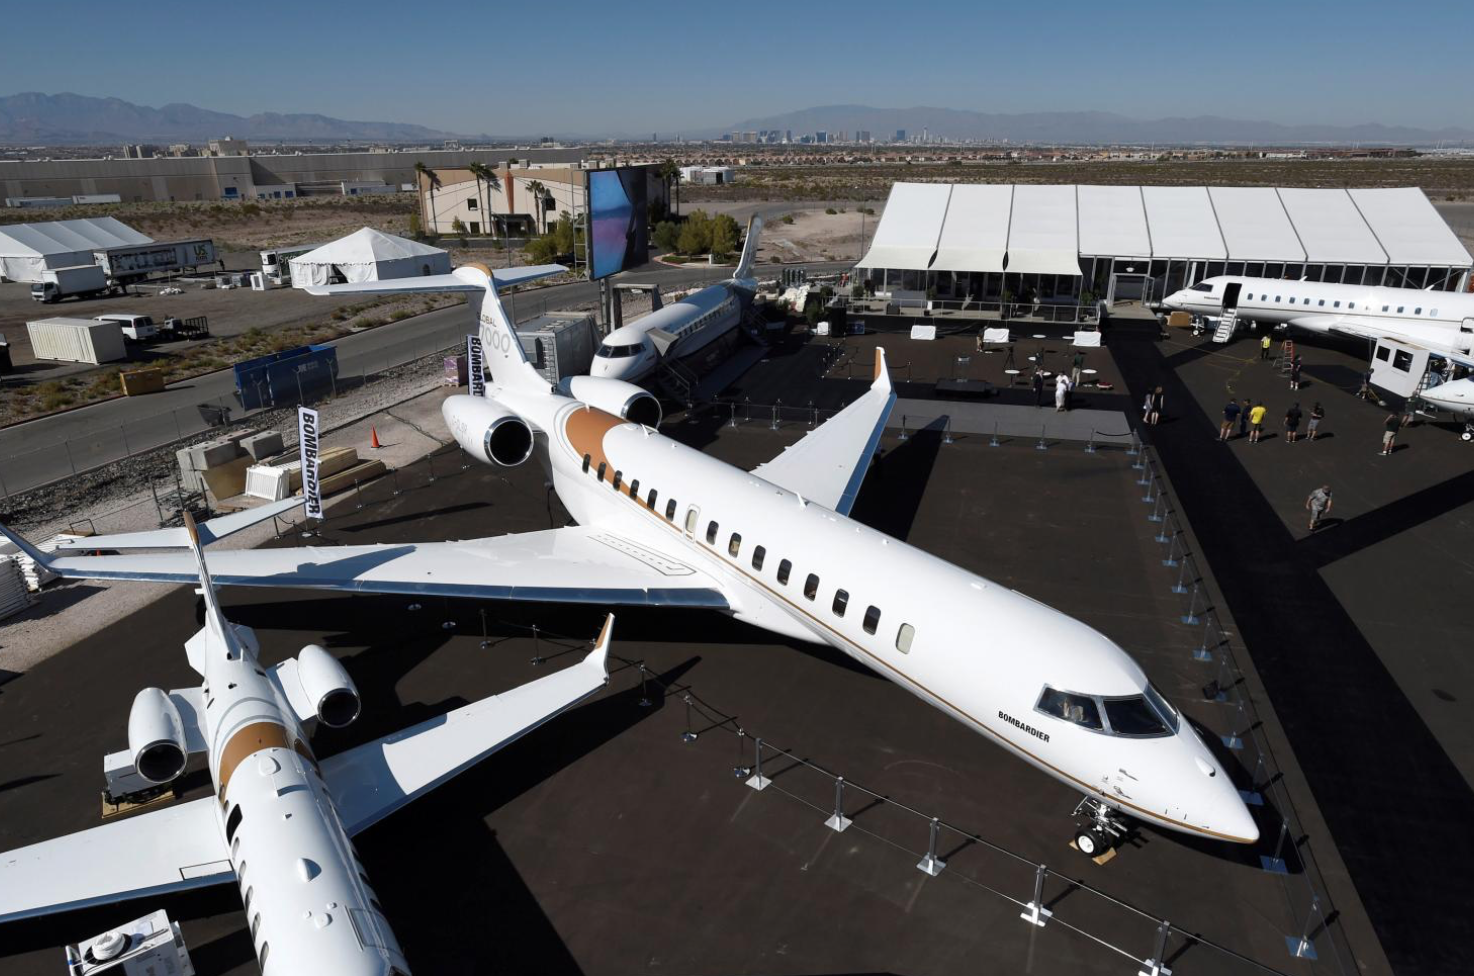 Bombardier’s New Global 7000 Makes Trade Show Debut In Las Vegas